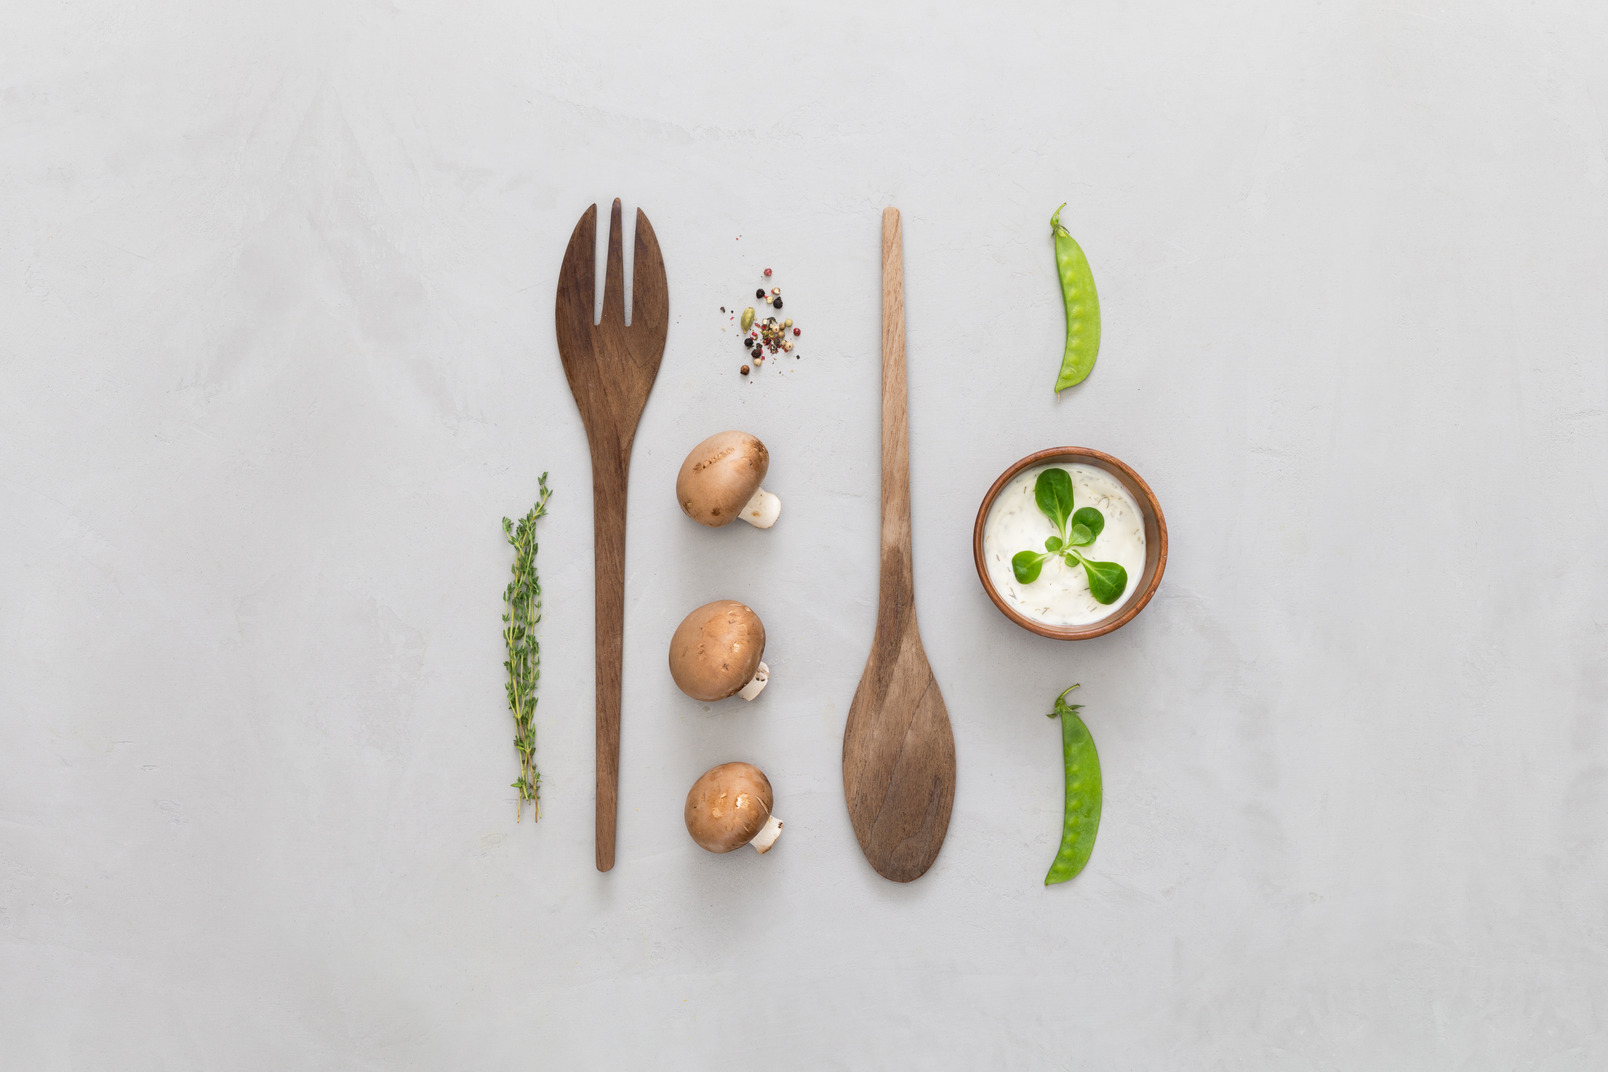 Mushrooms, greens, spices and wooden cutlery